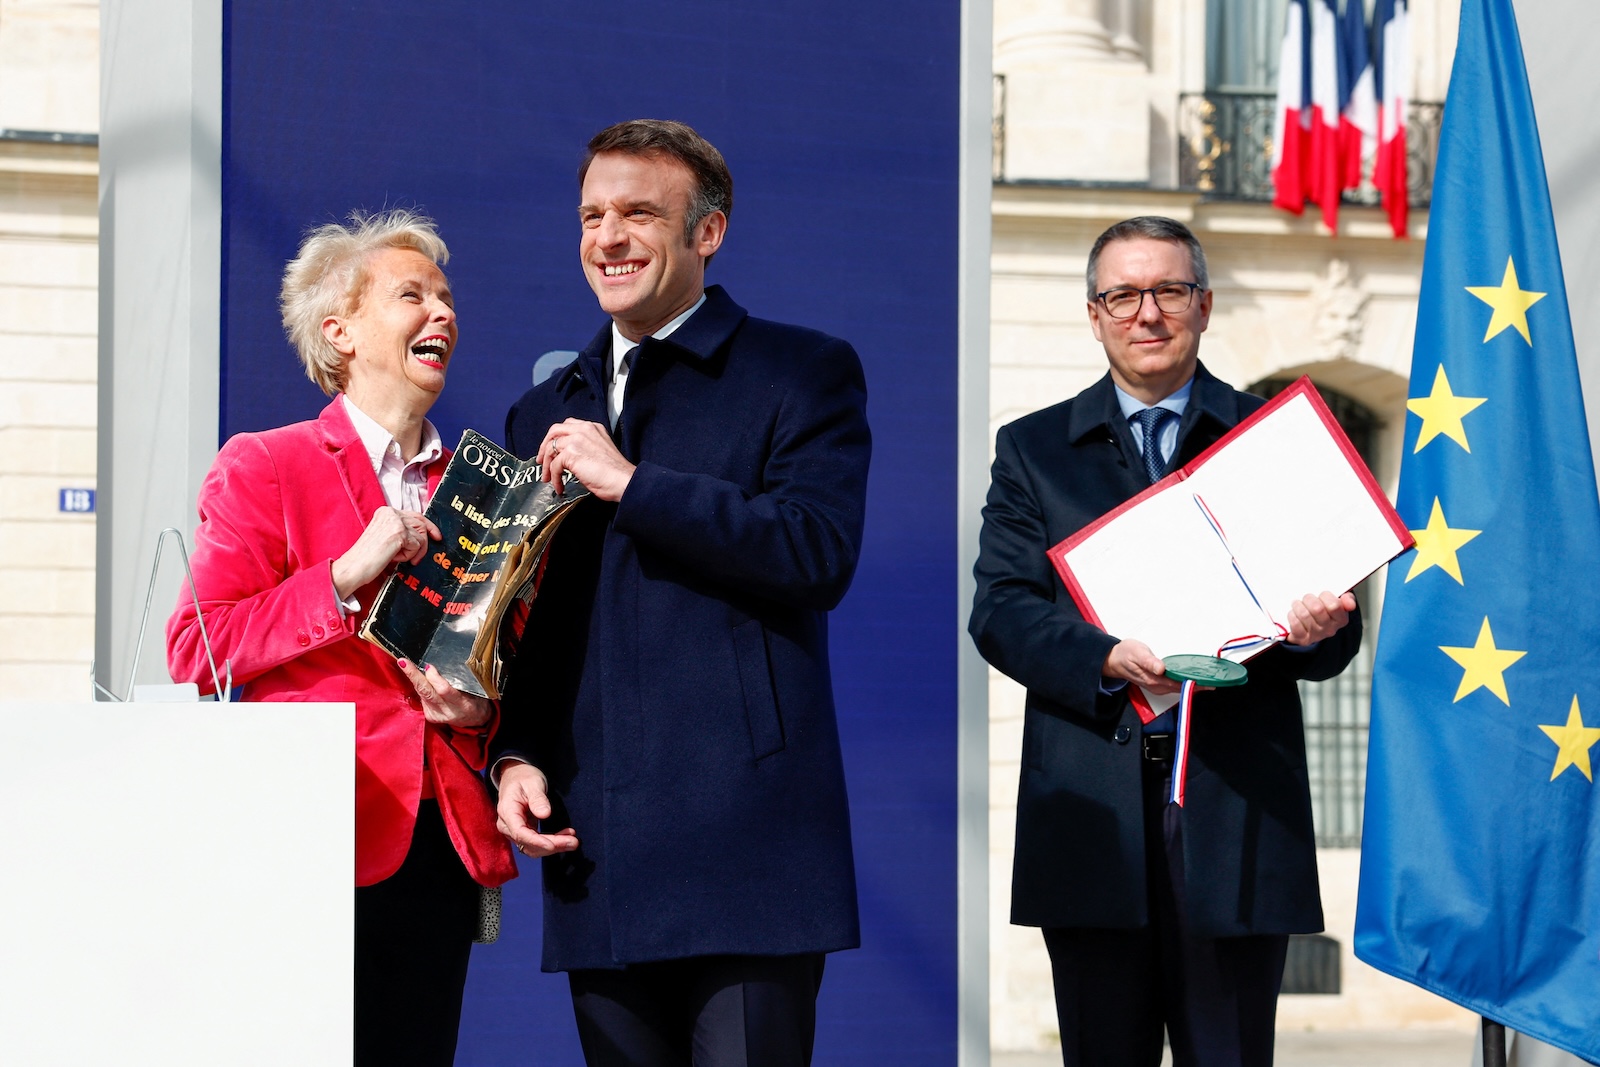 epa11206228 French President Emmanuel Macron and writer Claudine Monteil attend a ceremony to seal the right to abortion in the French constitution, on International Women's Day, at the Place Vendome, in Paris, France, 08 March 2024. French lawmakers on 04 March approved a bill to enshrine abortion rights in the Constitution becoming the only country in the world to clearly protect the right to terminate a pregnancy in its basic law.  EPA/Gonzalo Fuentes / POOL  MAXPPP OUT